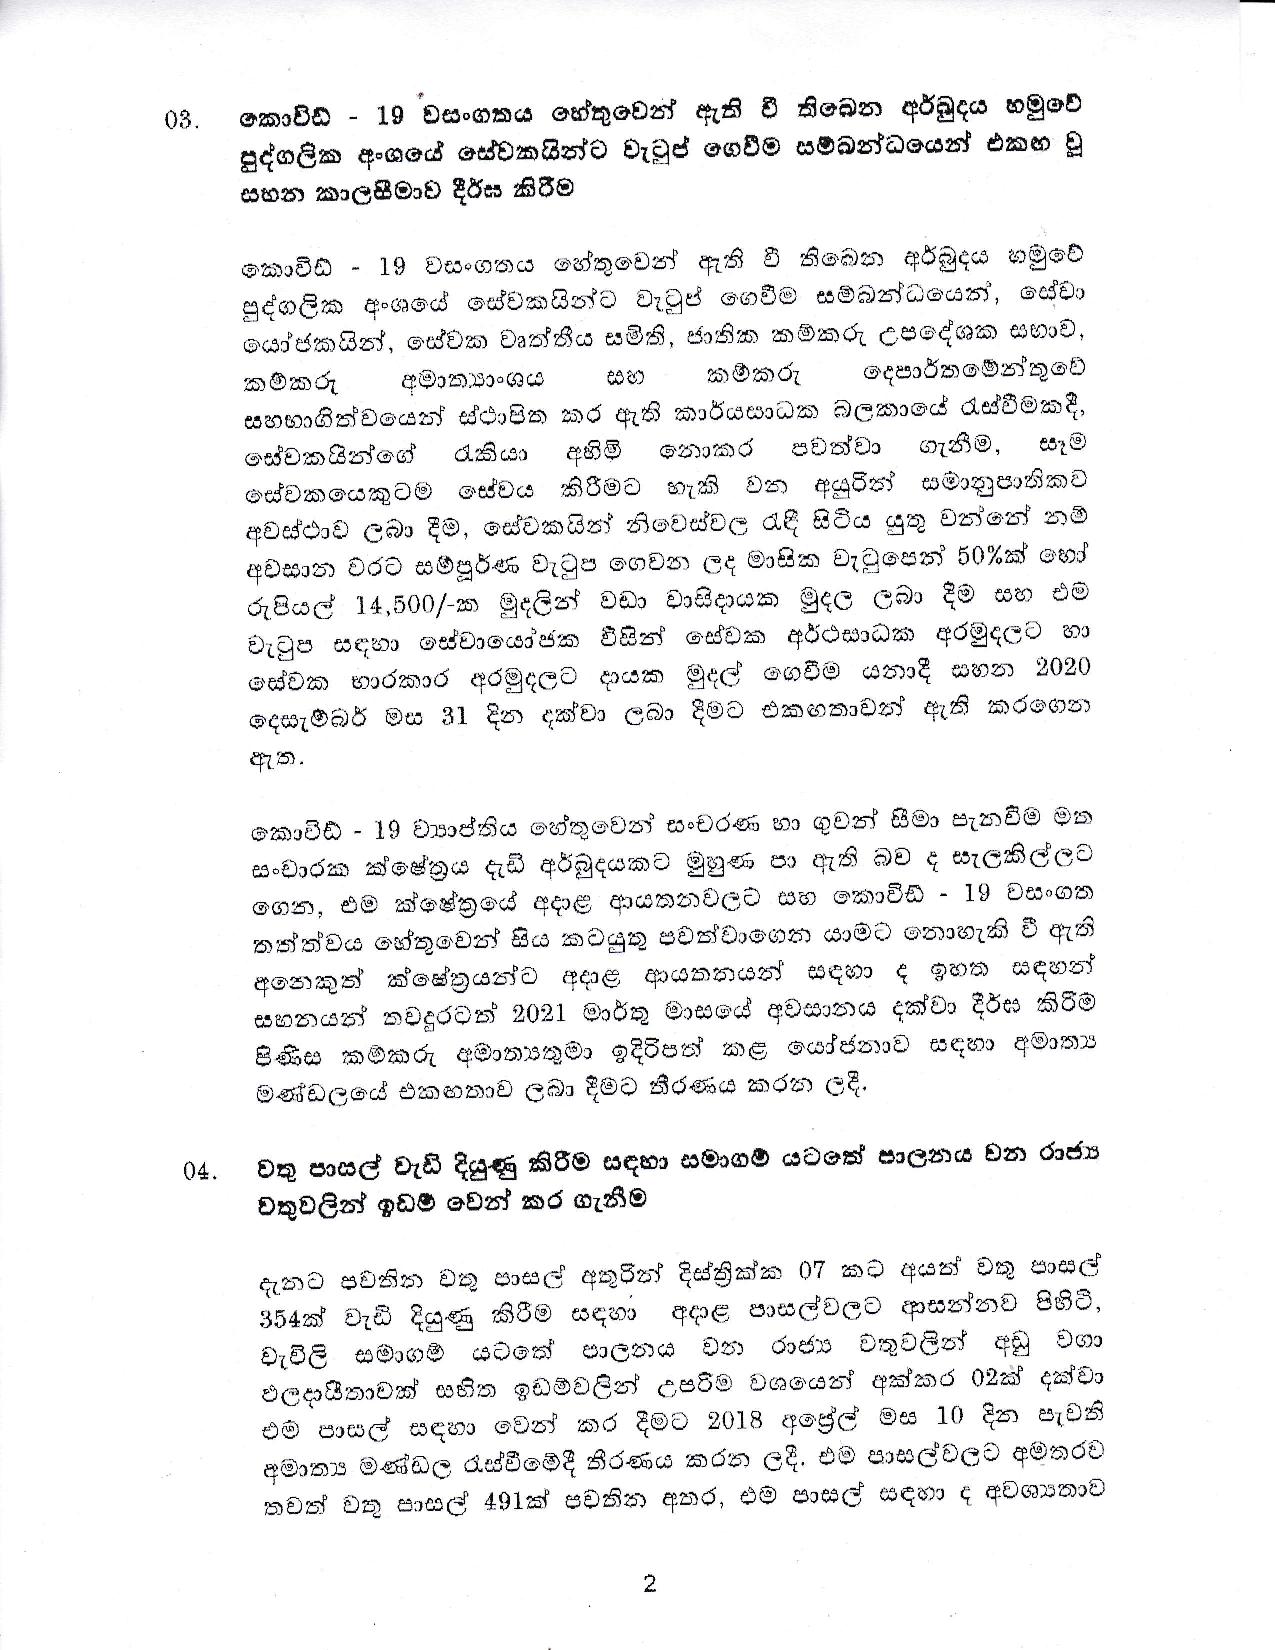 Cabinet Decision on 11.01.2021 page 002